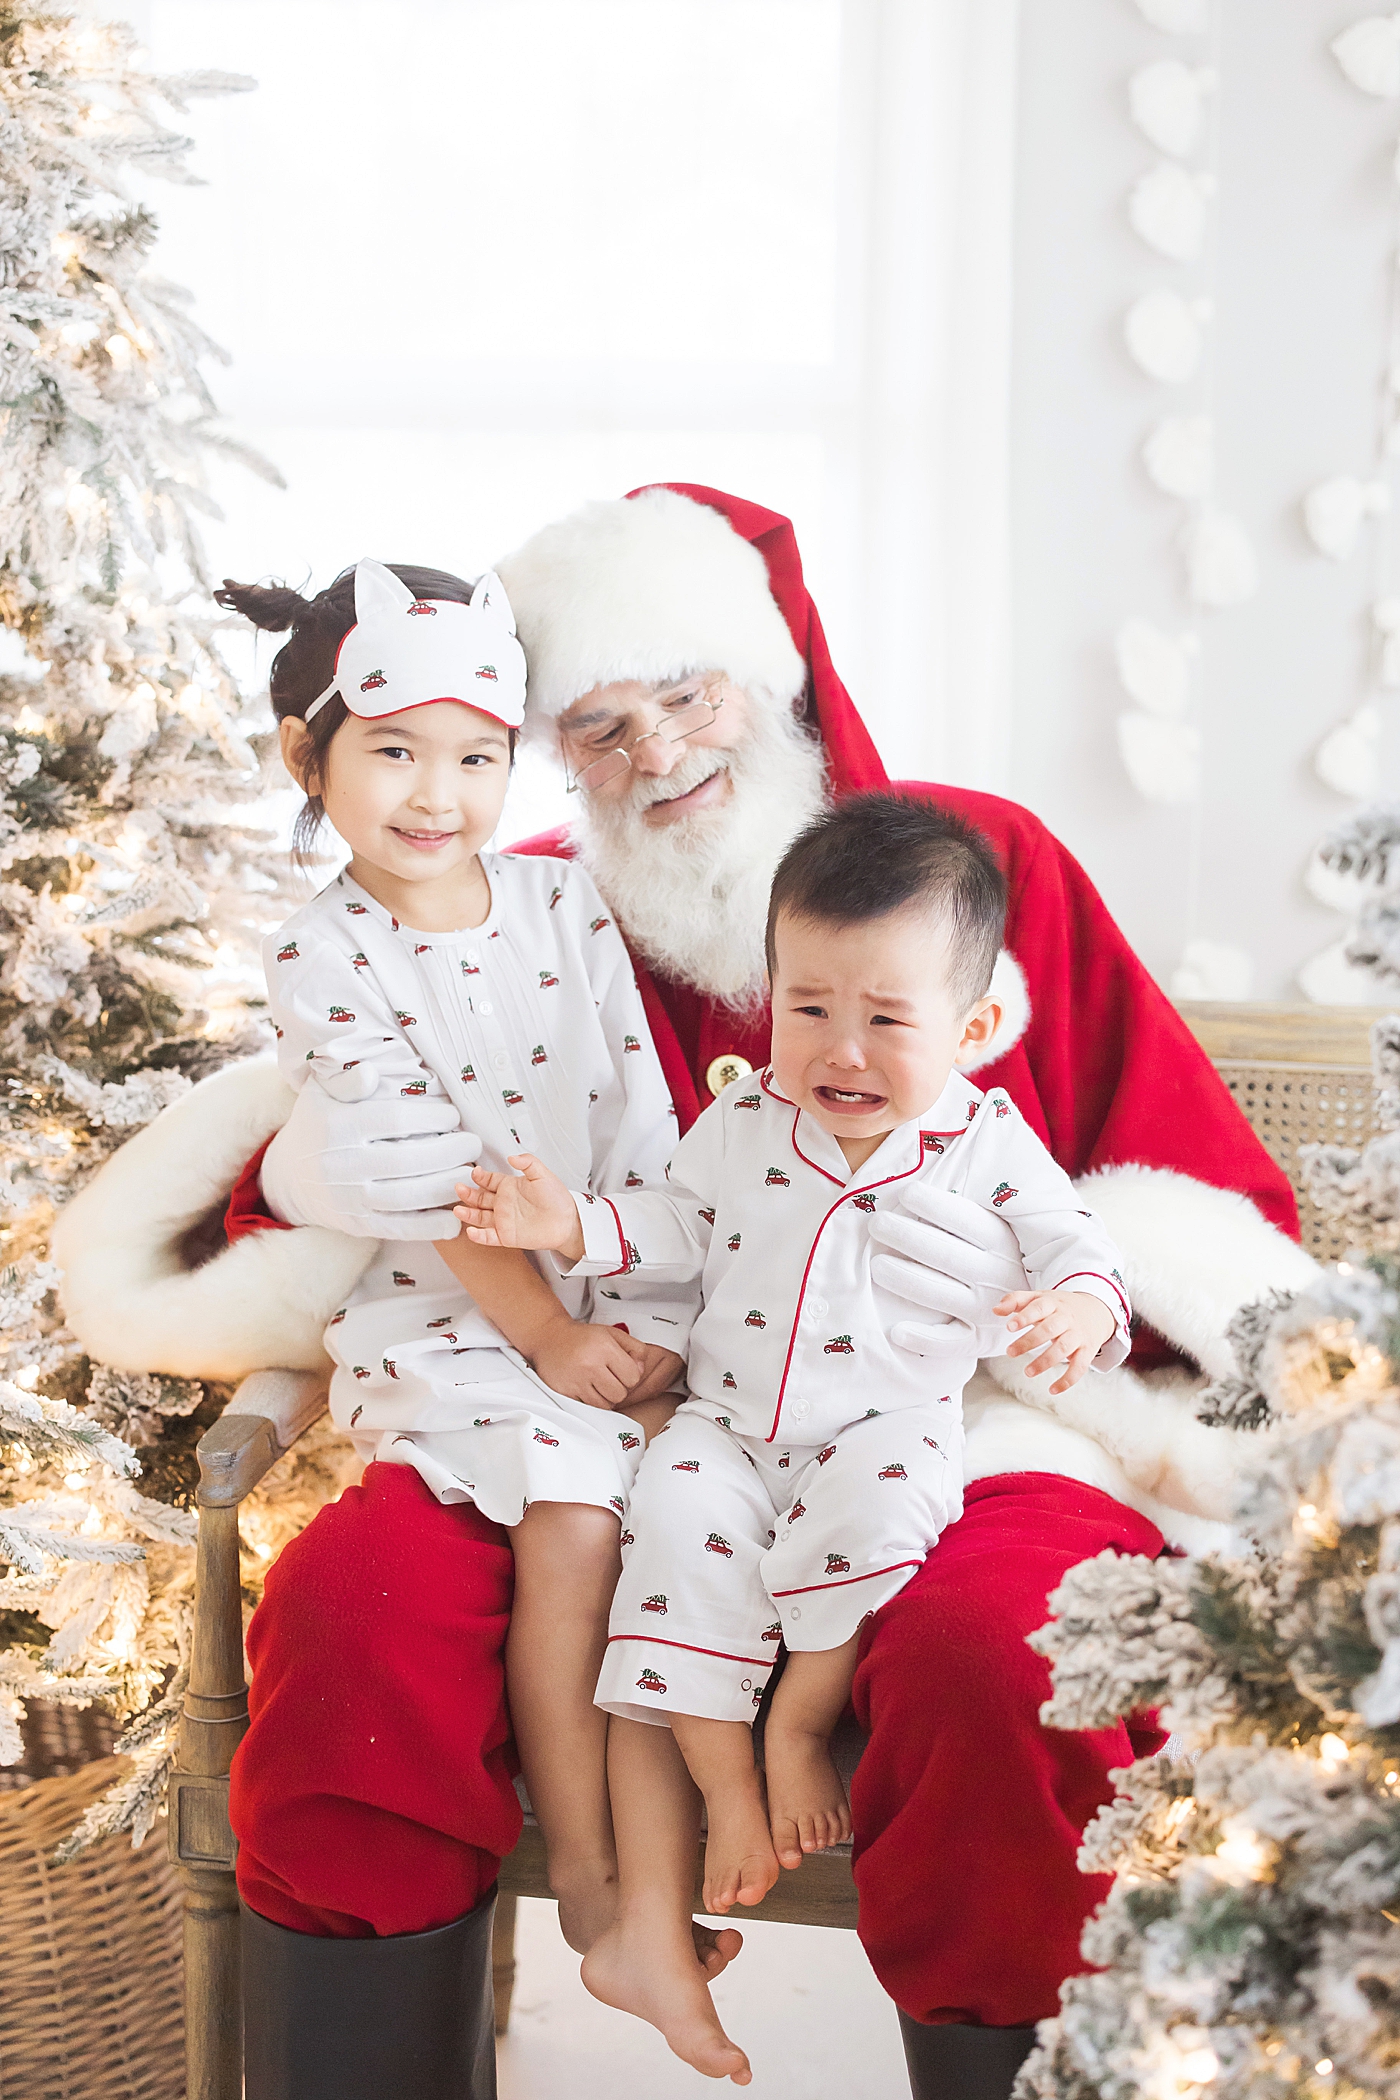 Brother and sister on Santa's lap. One is crying. Photo by Fresh Light Photography.